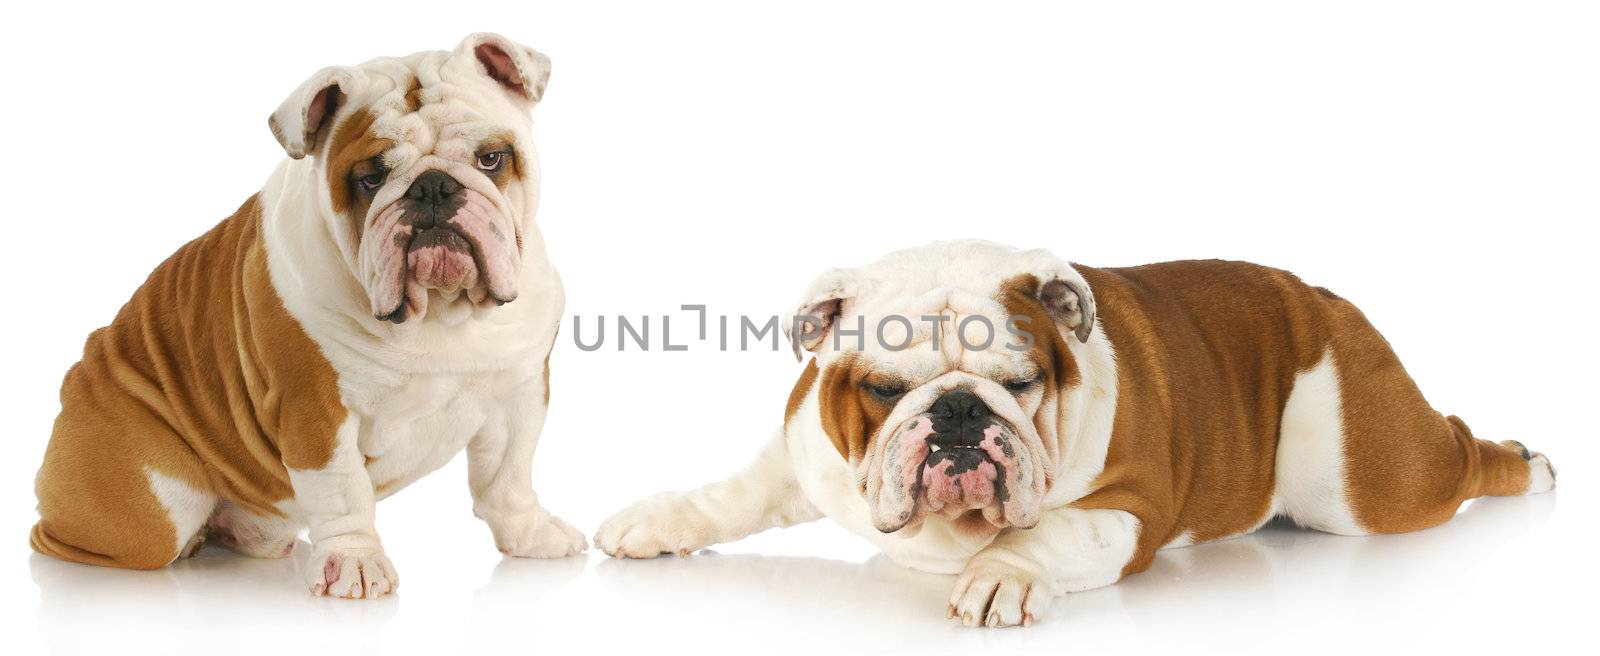 dog fight - two english bulldogs with funny expressions on white background